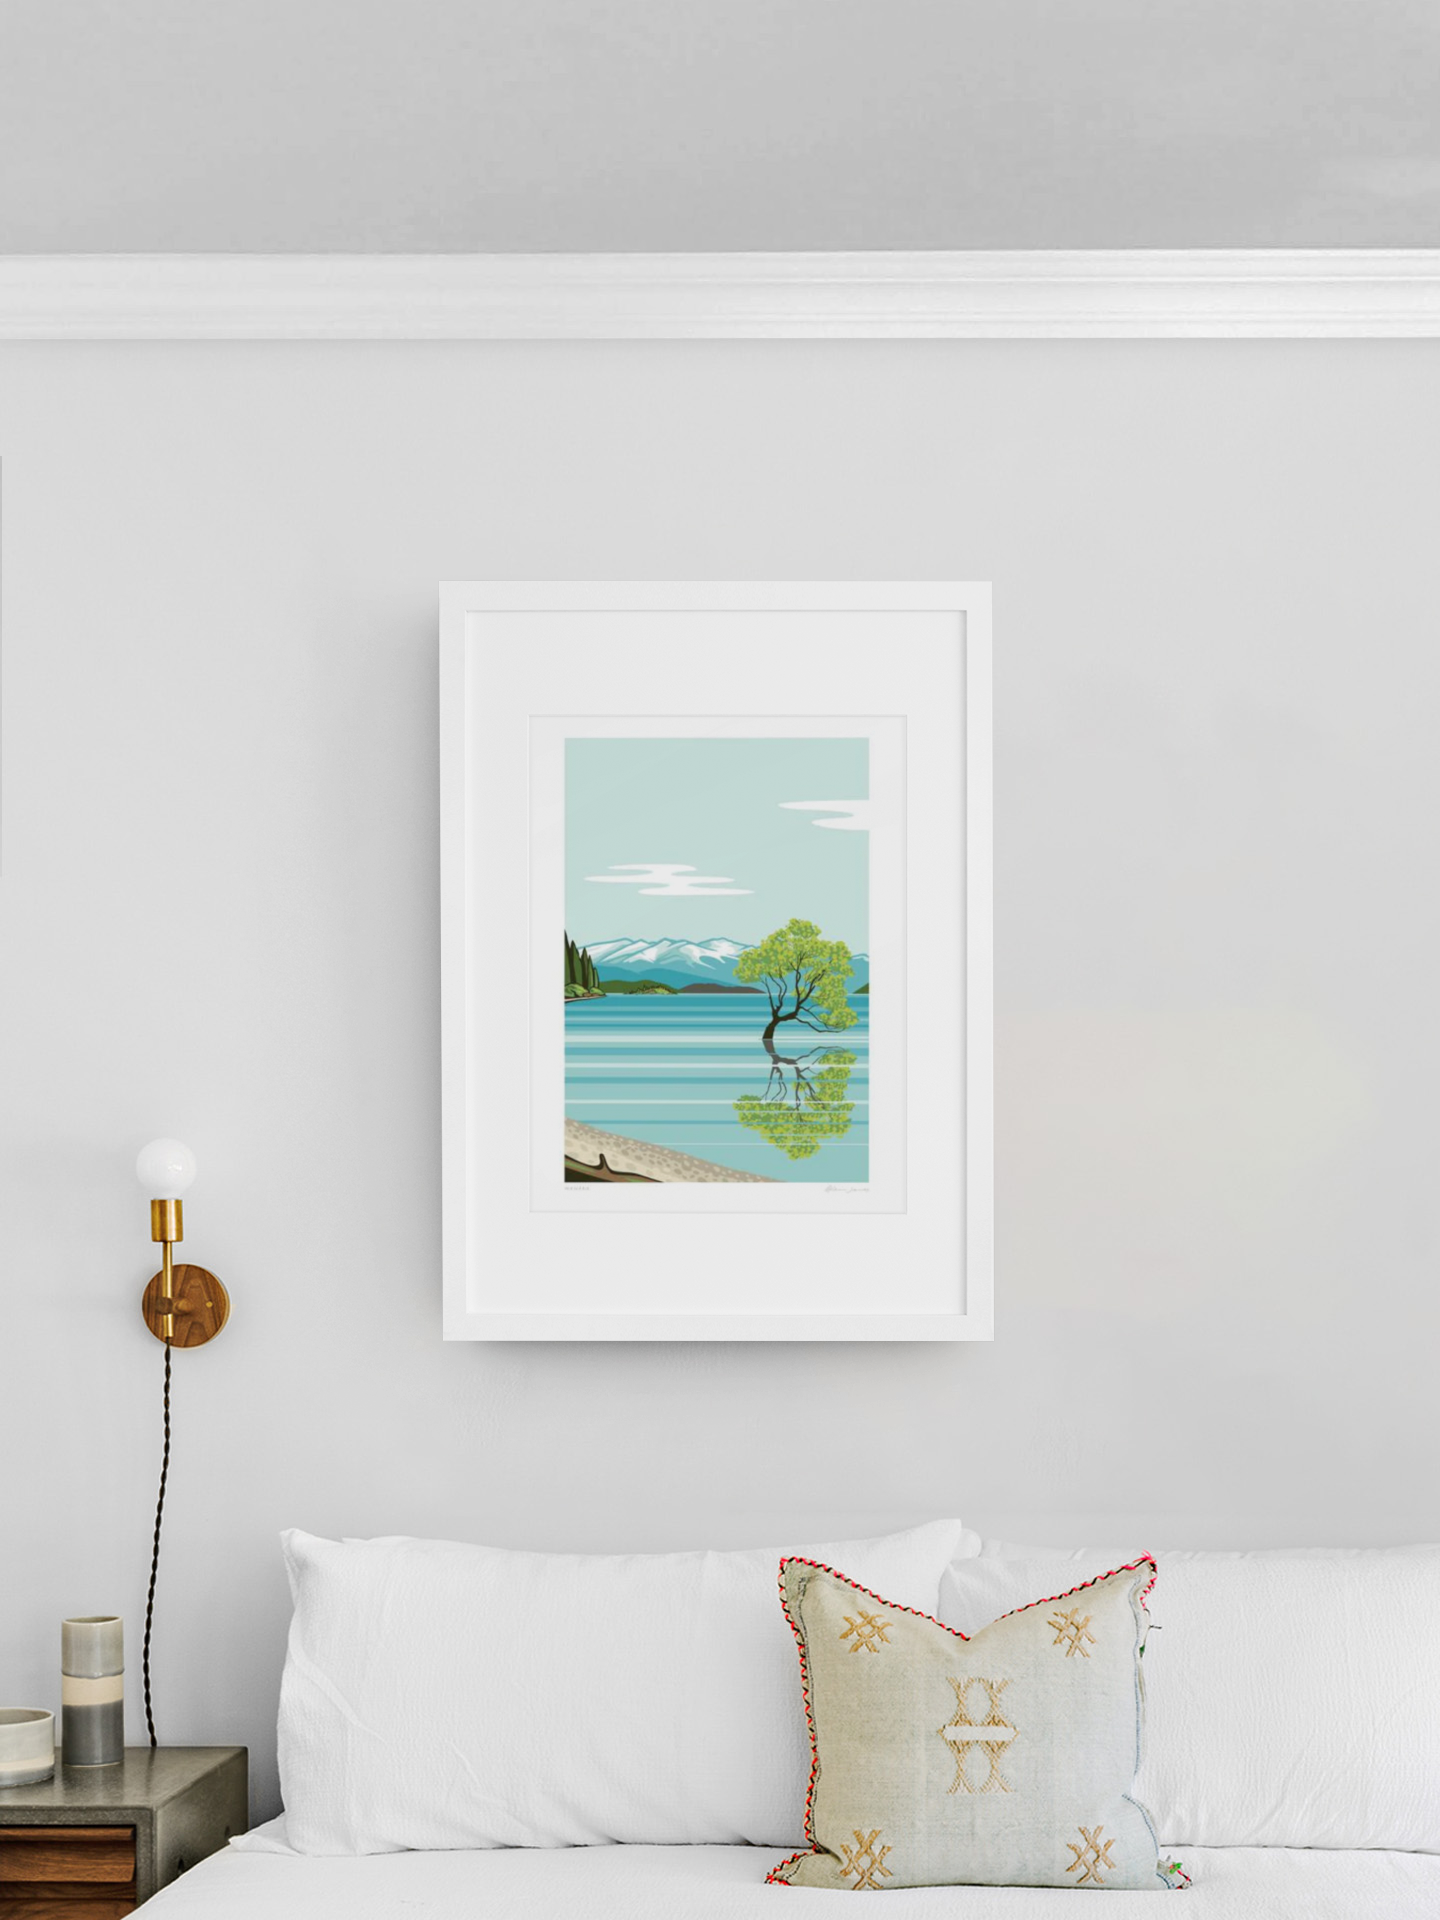 A serene landscape painting from the Wanaka by Glenn Jones series featuring the Wanaka Tree and a lake is elegantly framed and displayed on a clean, white wall above a cozy and inviting bed with plush pillows.